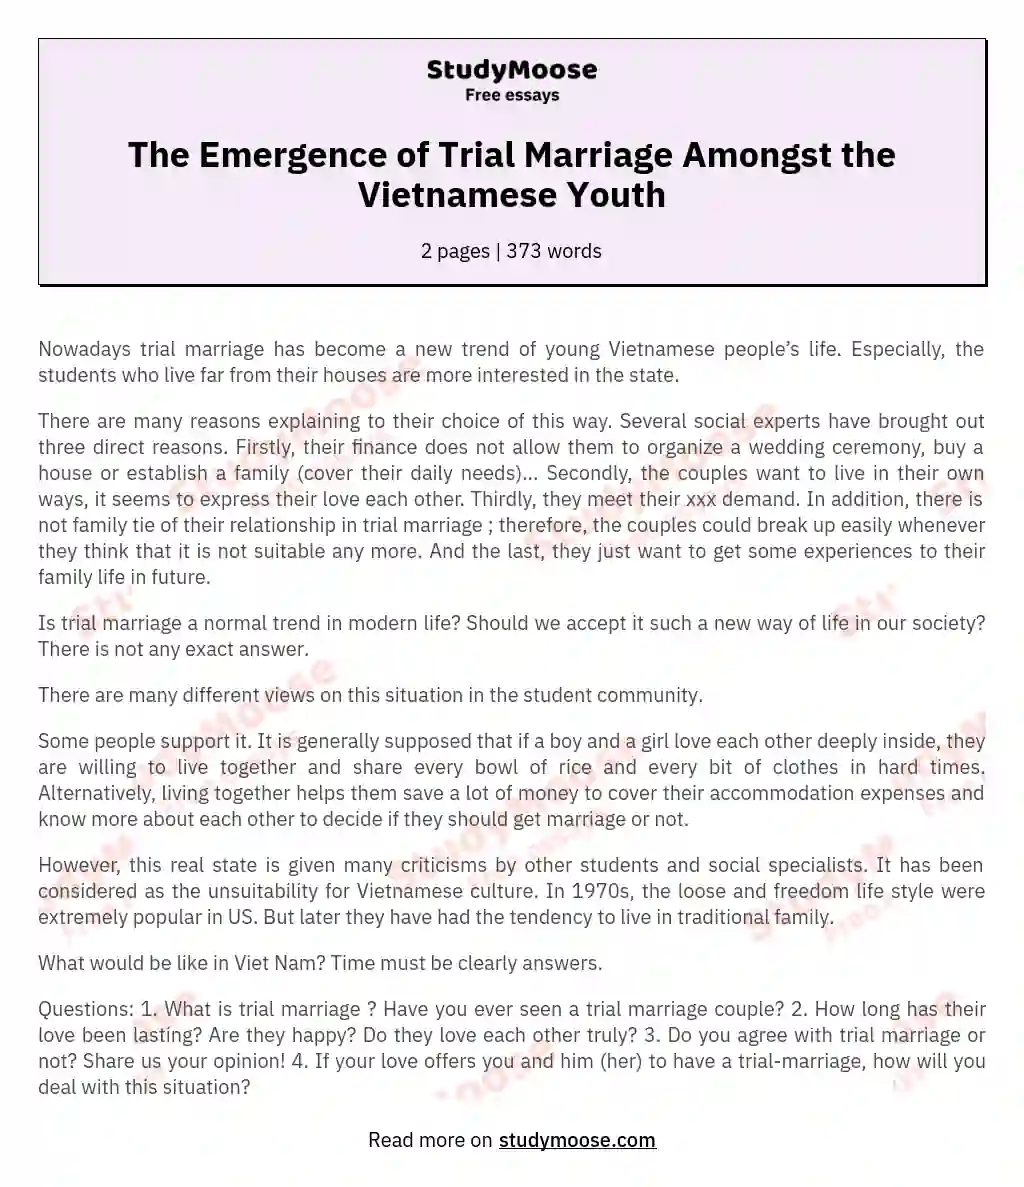 The Emergence of Trial Marriage Amongst the Vietnamese Youth essay